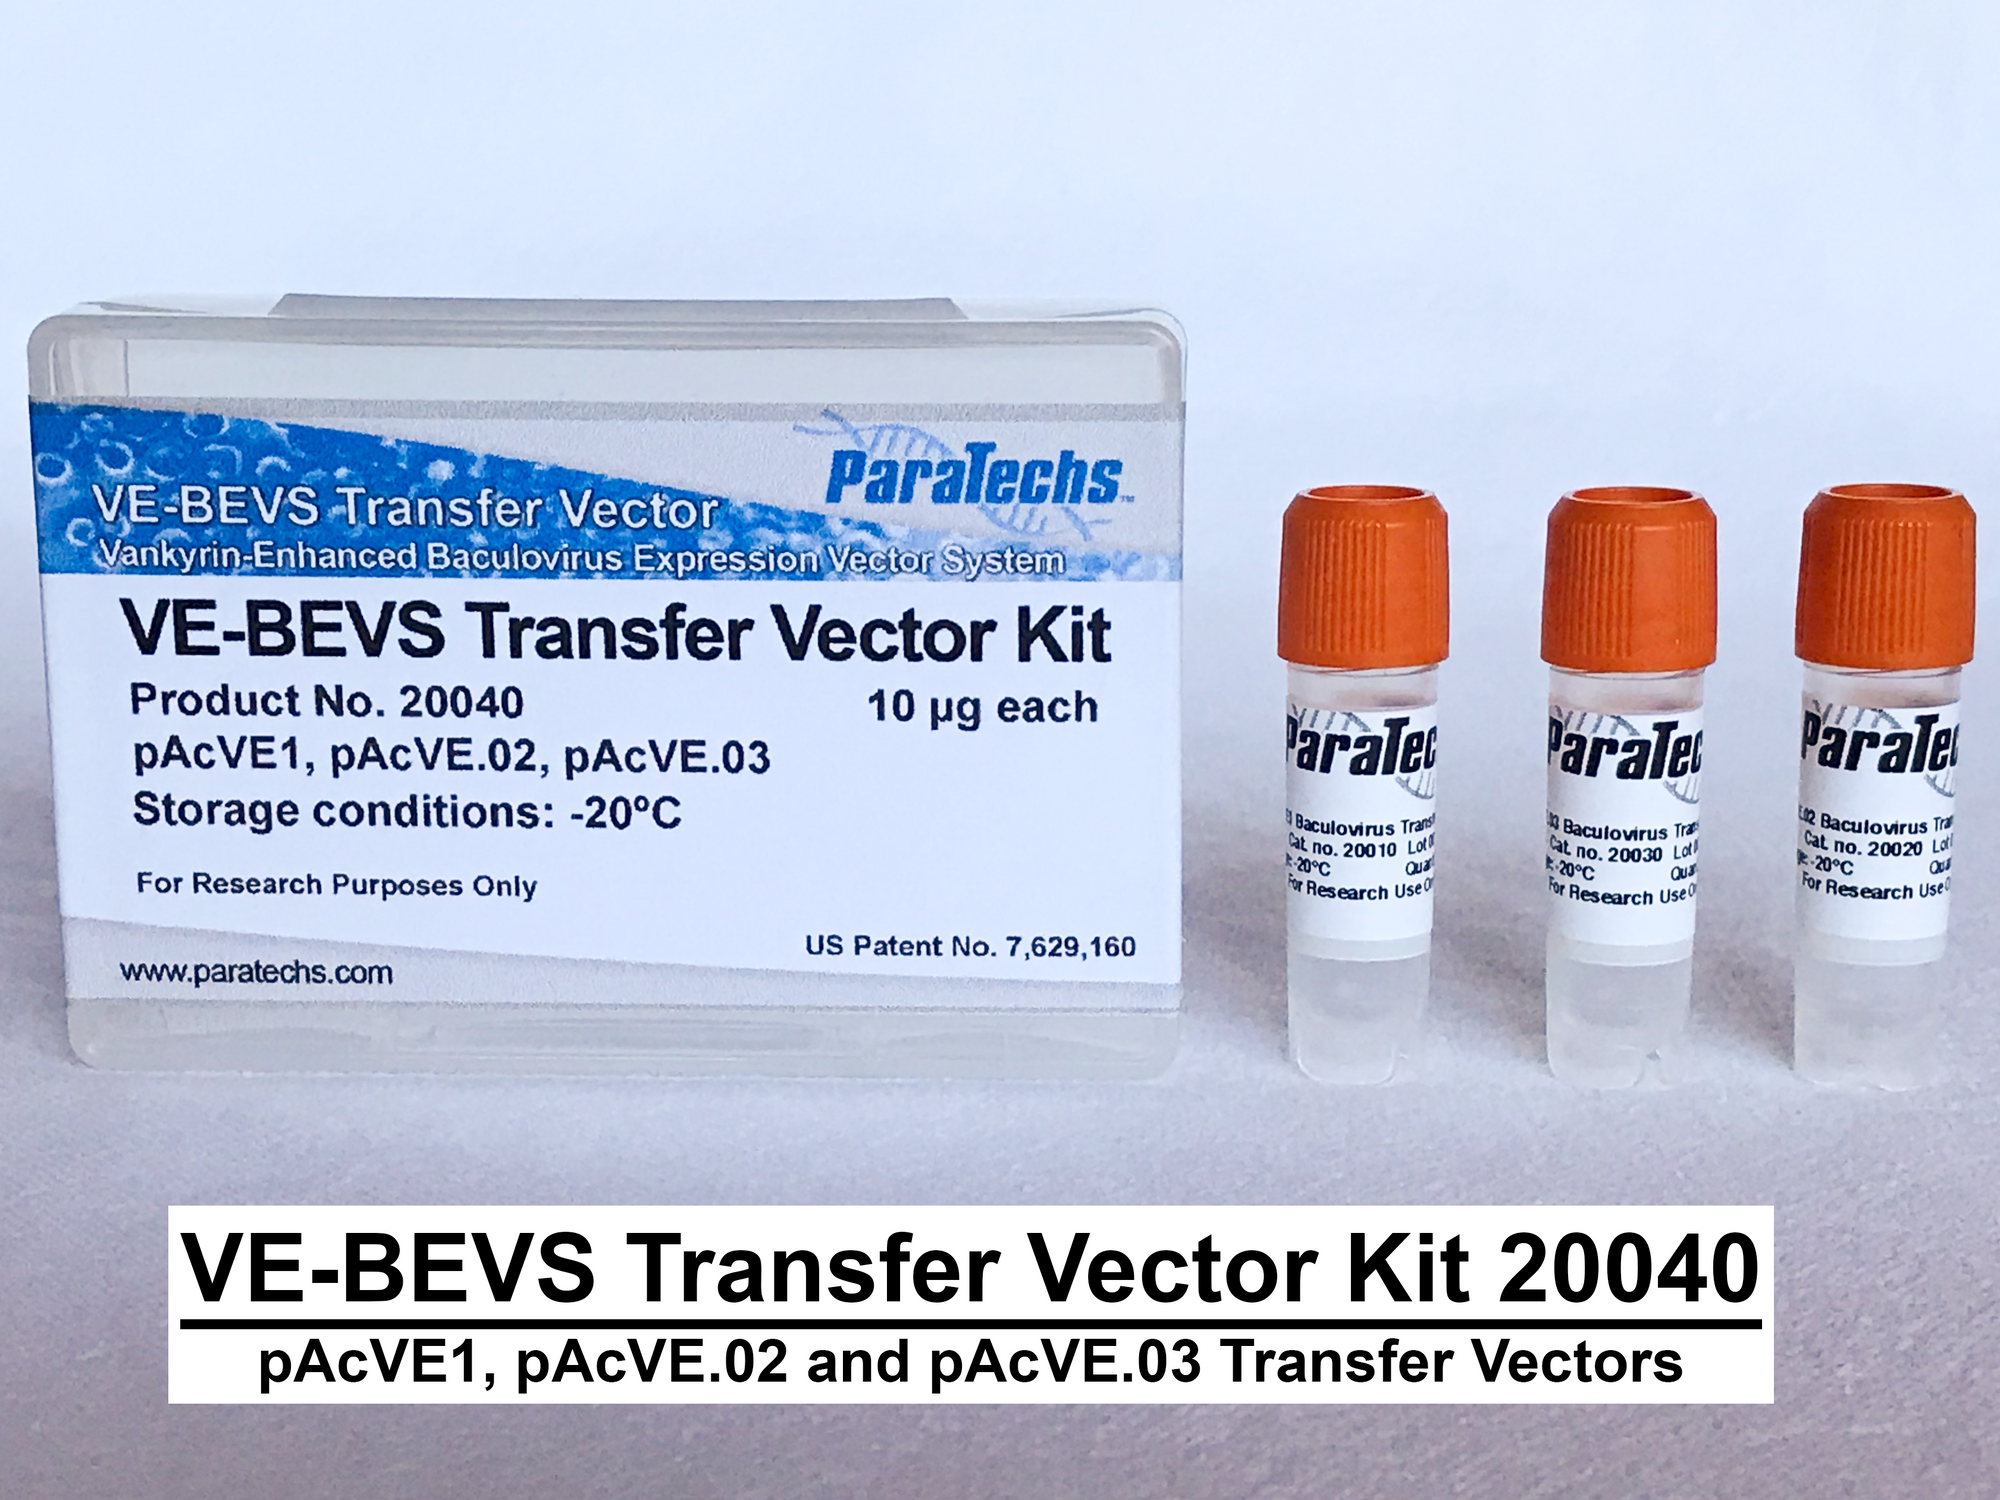 VE-BEVS Transfer Vector Kit 20040 (pAcVE1, pAcVE.02 and pAcVE.03)